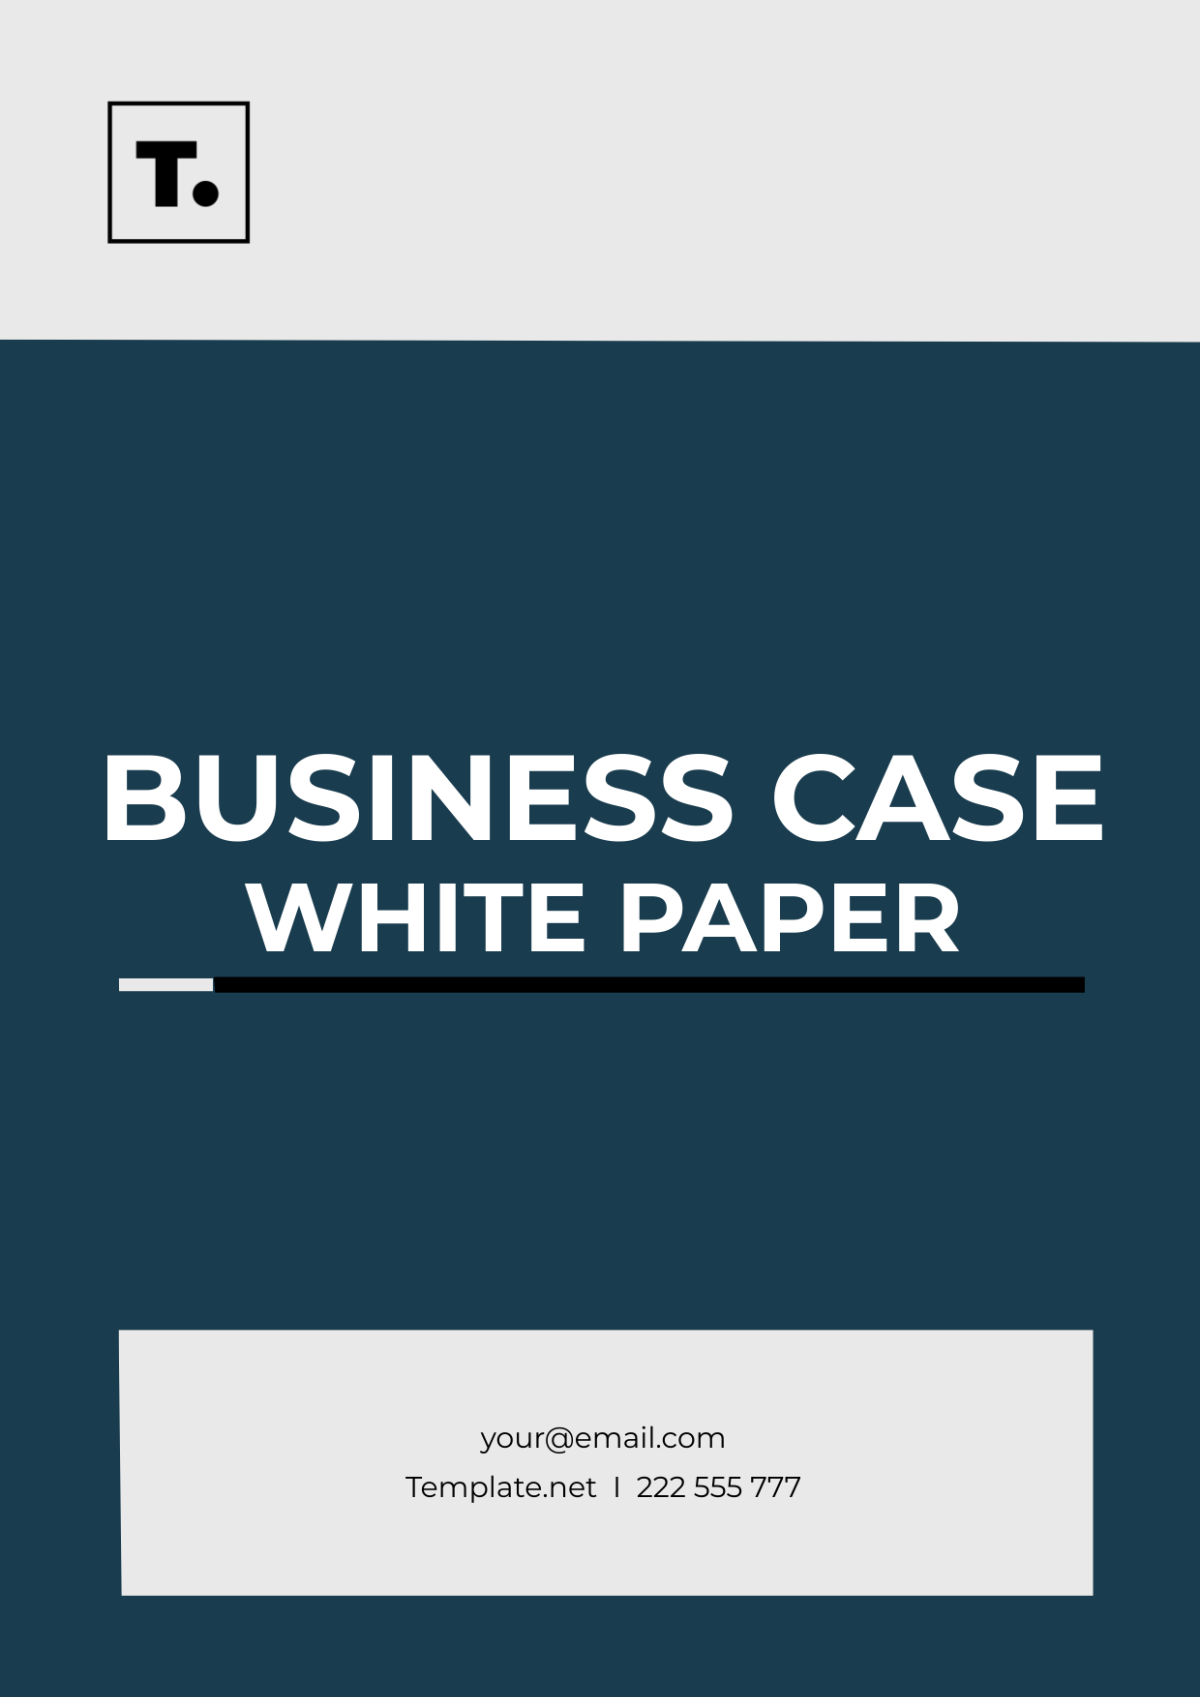 Business Case White Paper Template